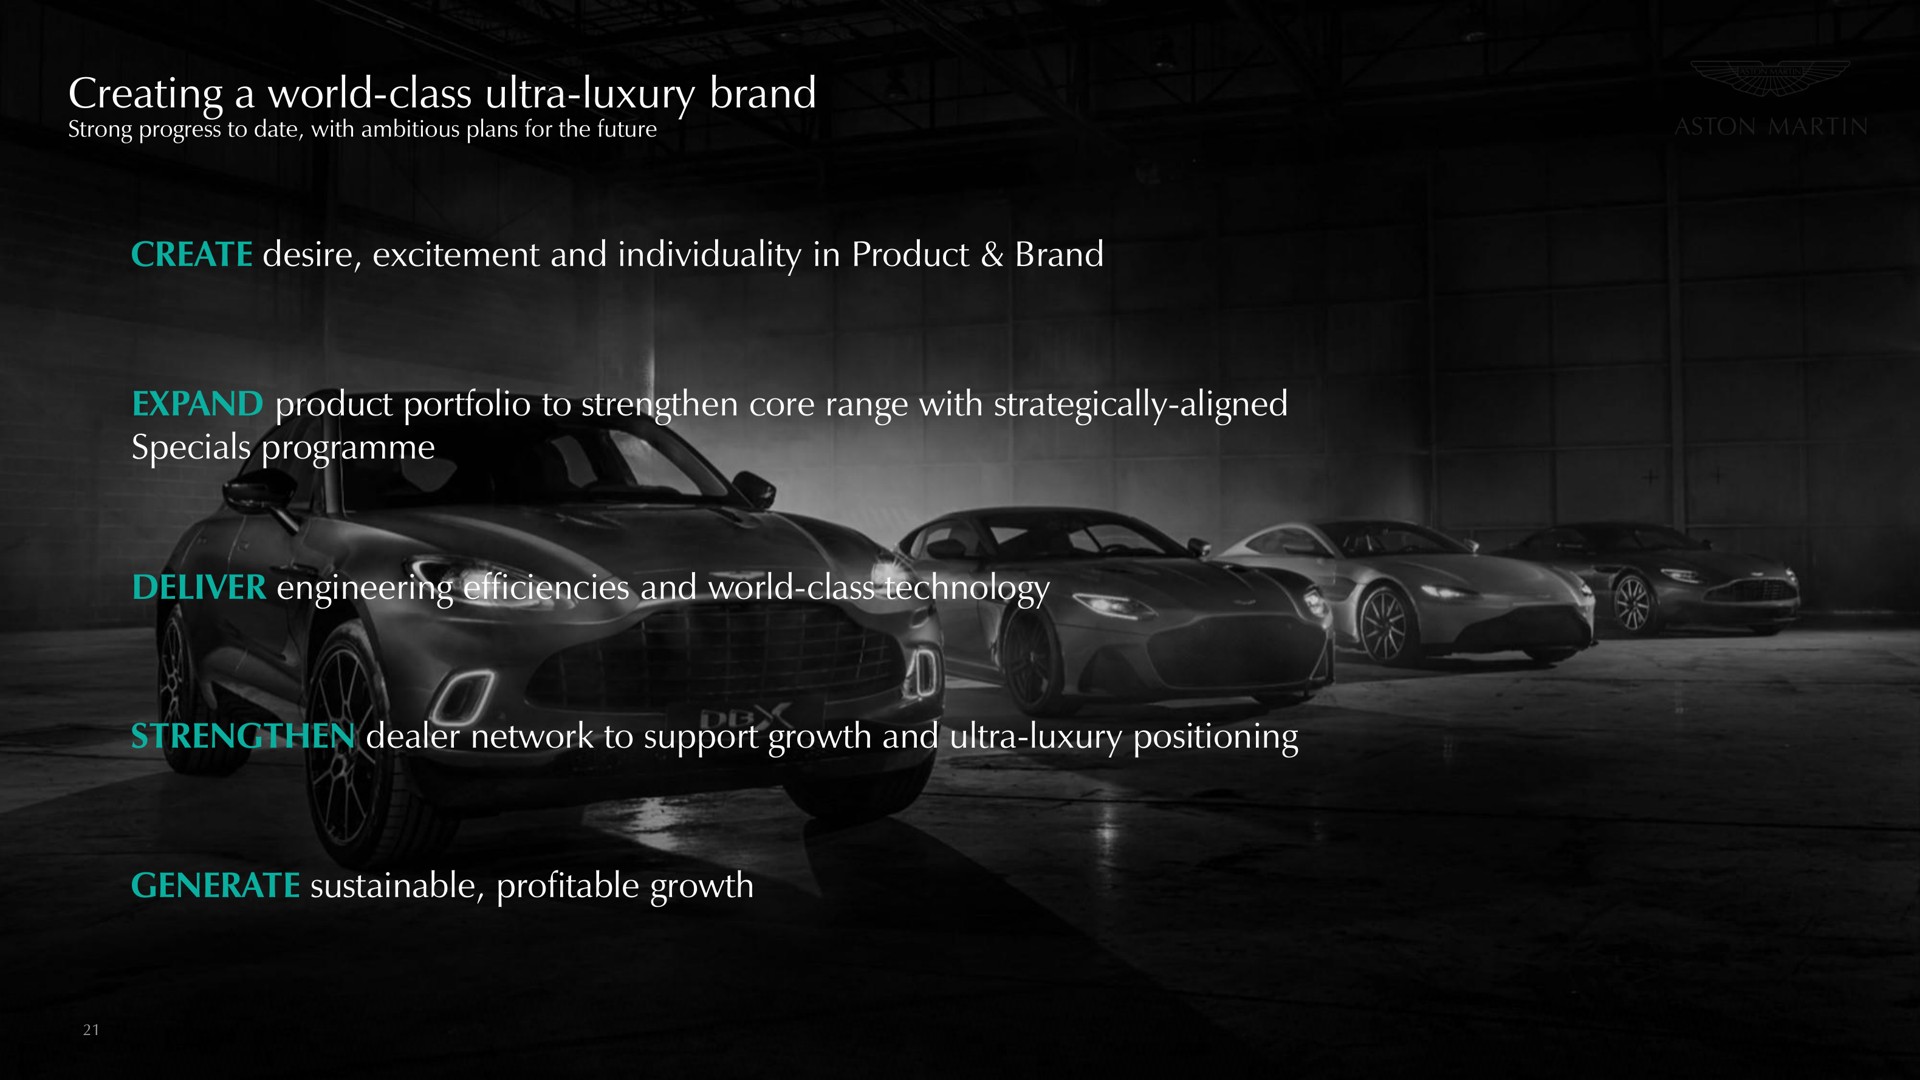 creating a world class ultra luxury brand create desire excitement and individuality in product brand expand product portfolio to strengthen core range with strategically aligned specials deliver engineering efficiencies and world class technology strengthen dealer network to support growth and ultra luxury positioning generate sustainable profitable growth bum ire or luxury | Aston Martin Lagonda